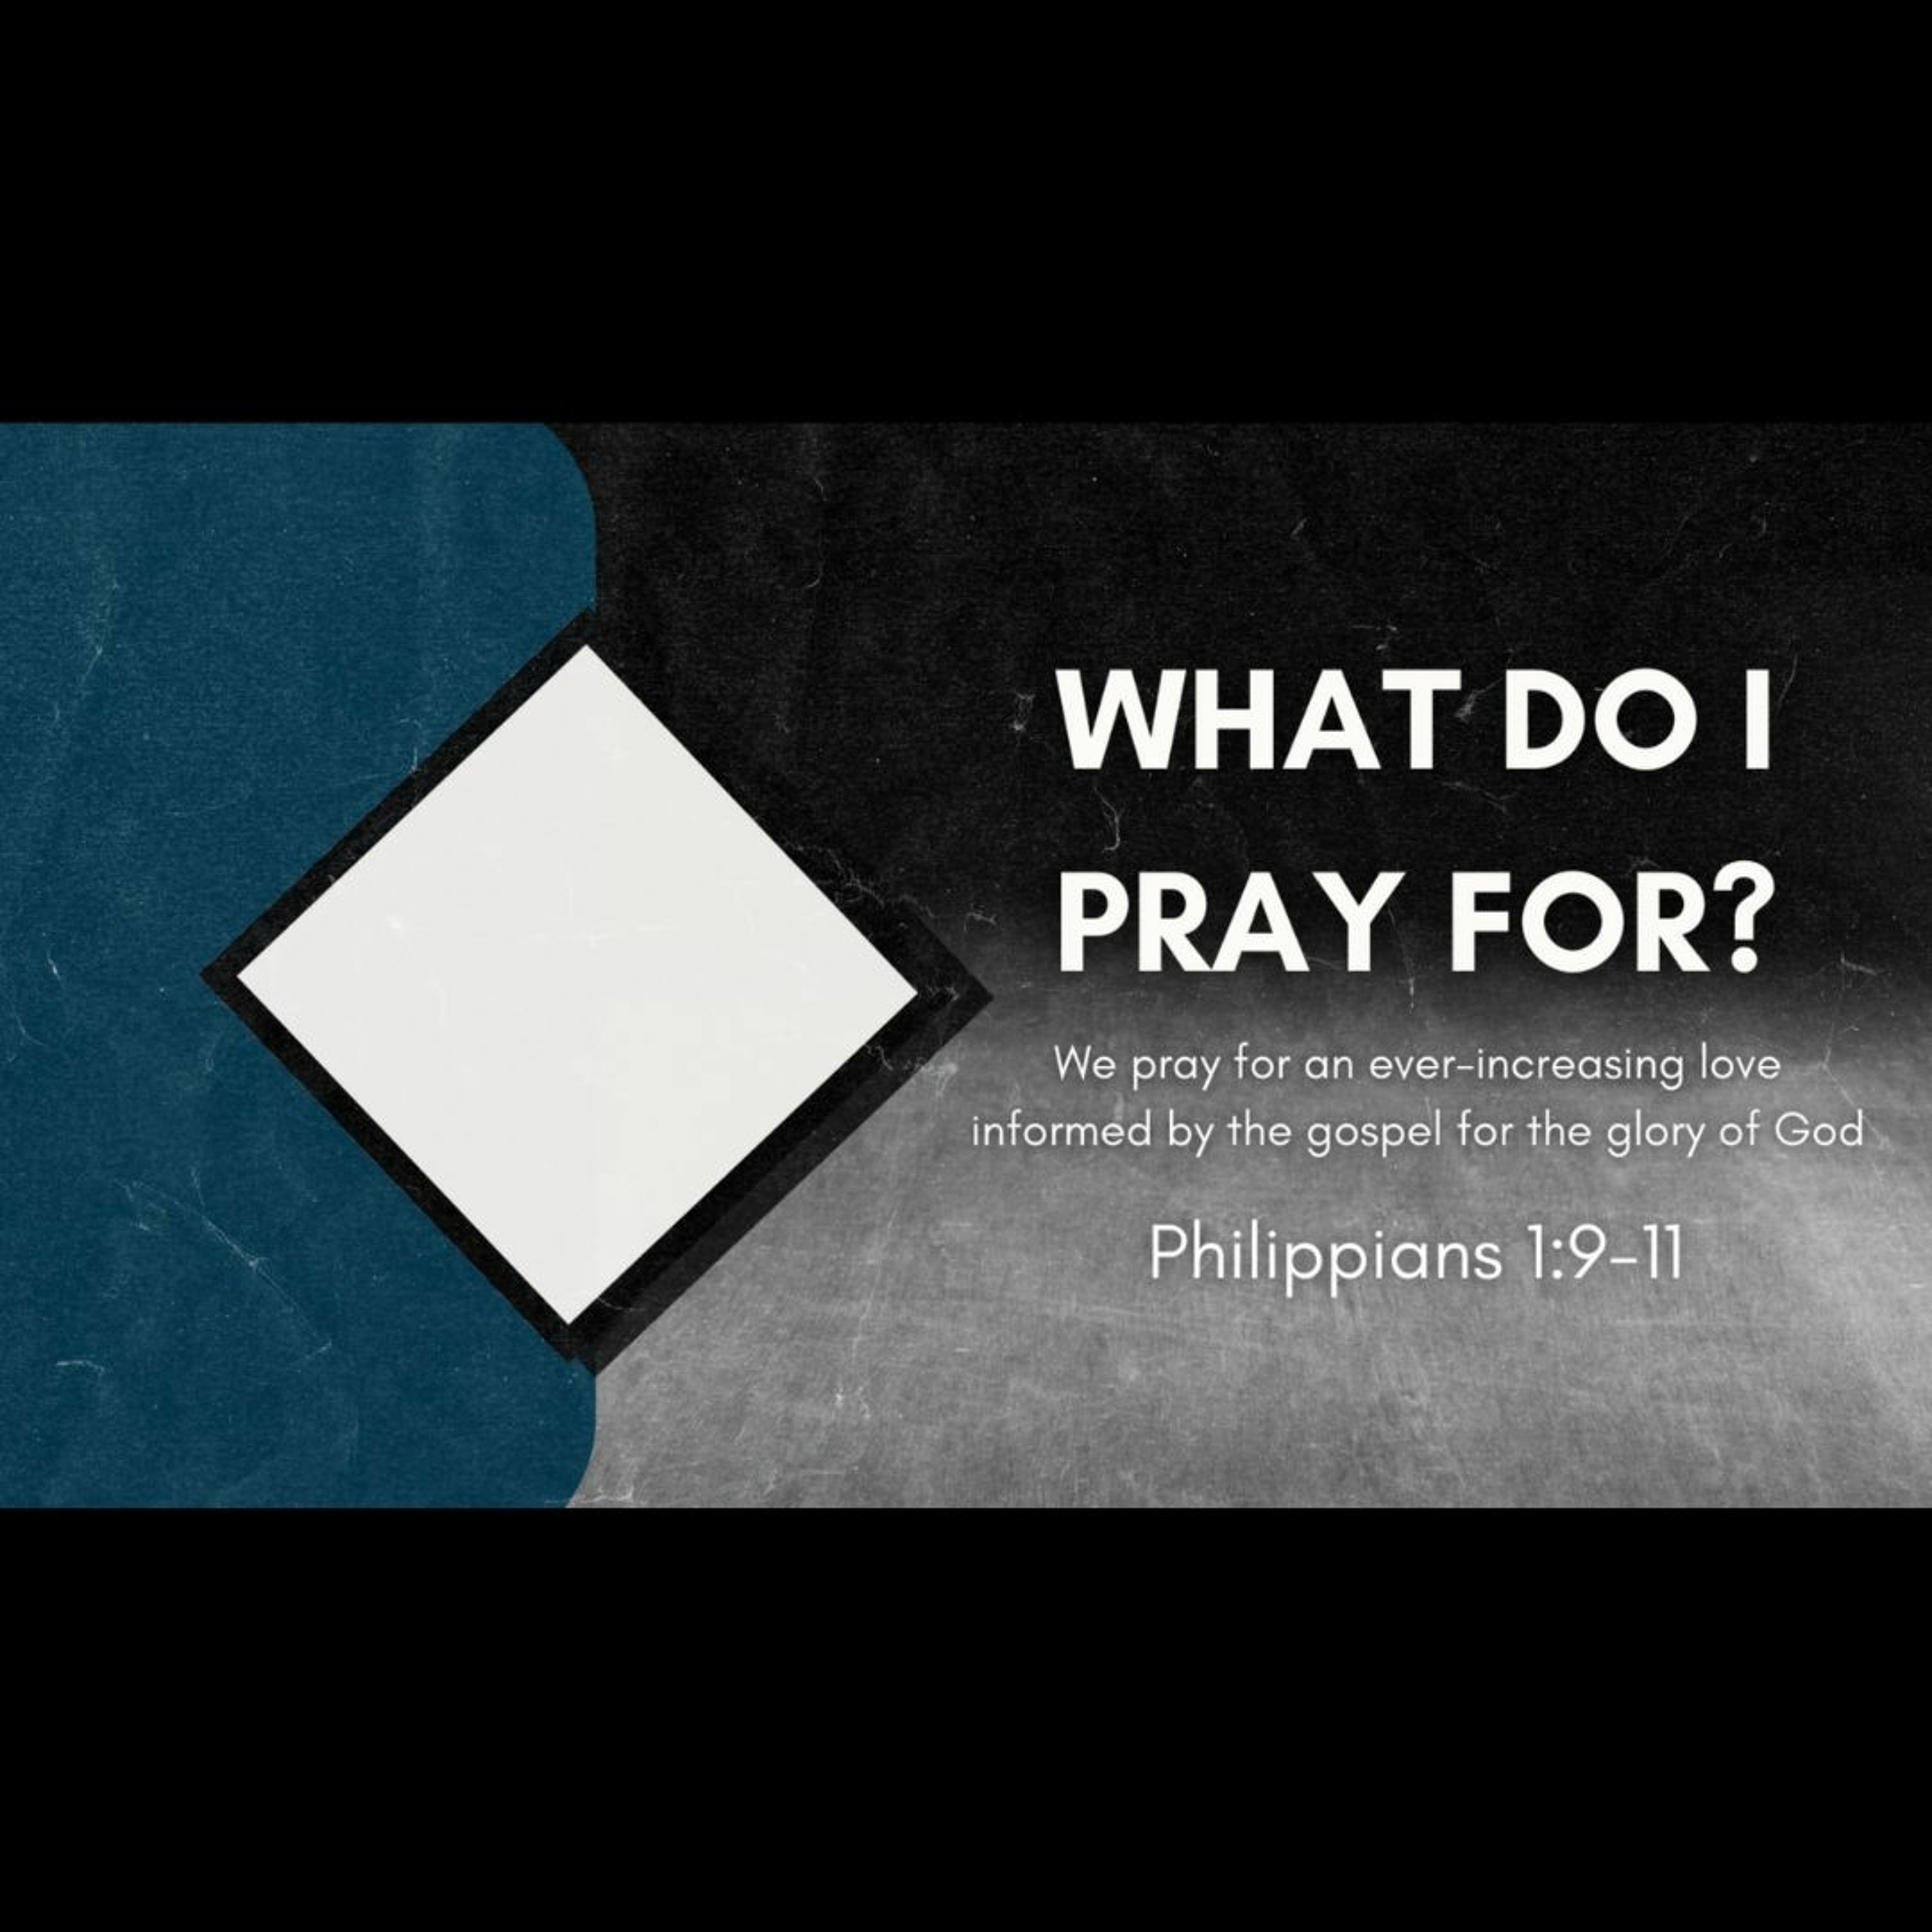 What Do I Pray For? (Philippians 1:9-11)